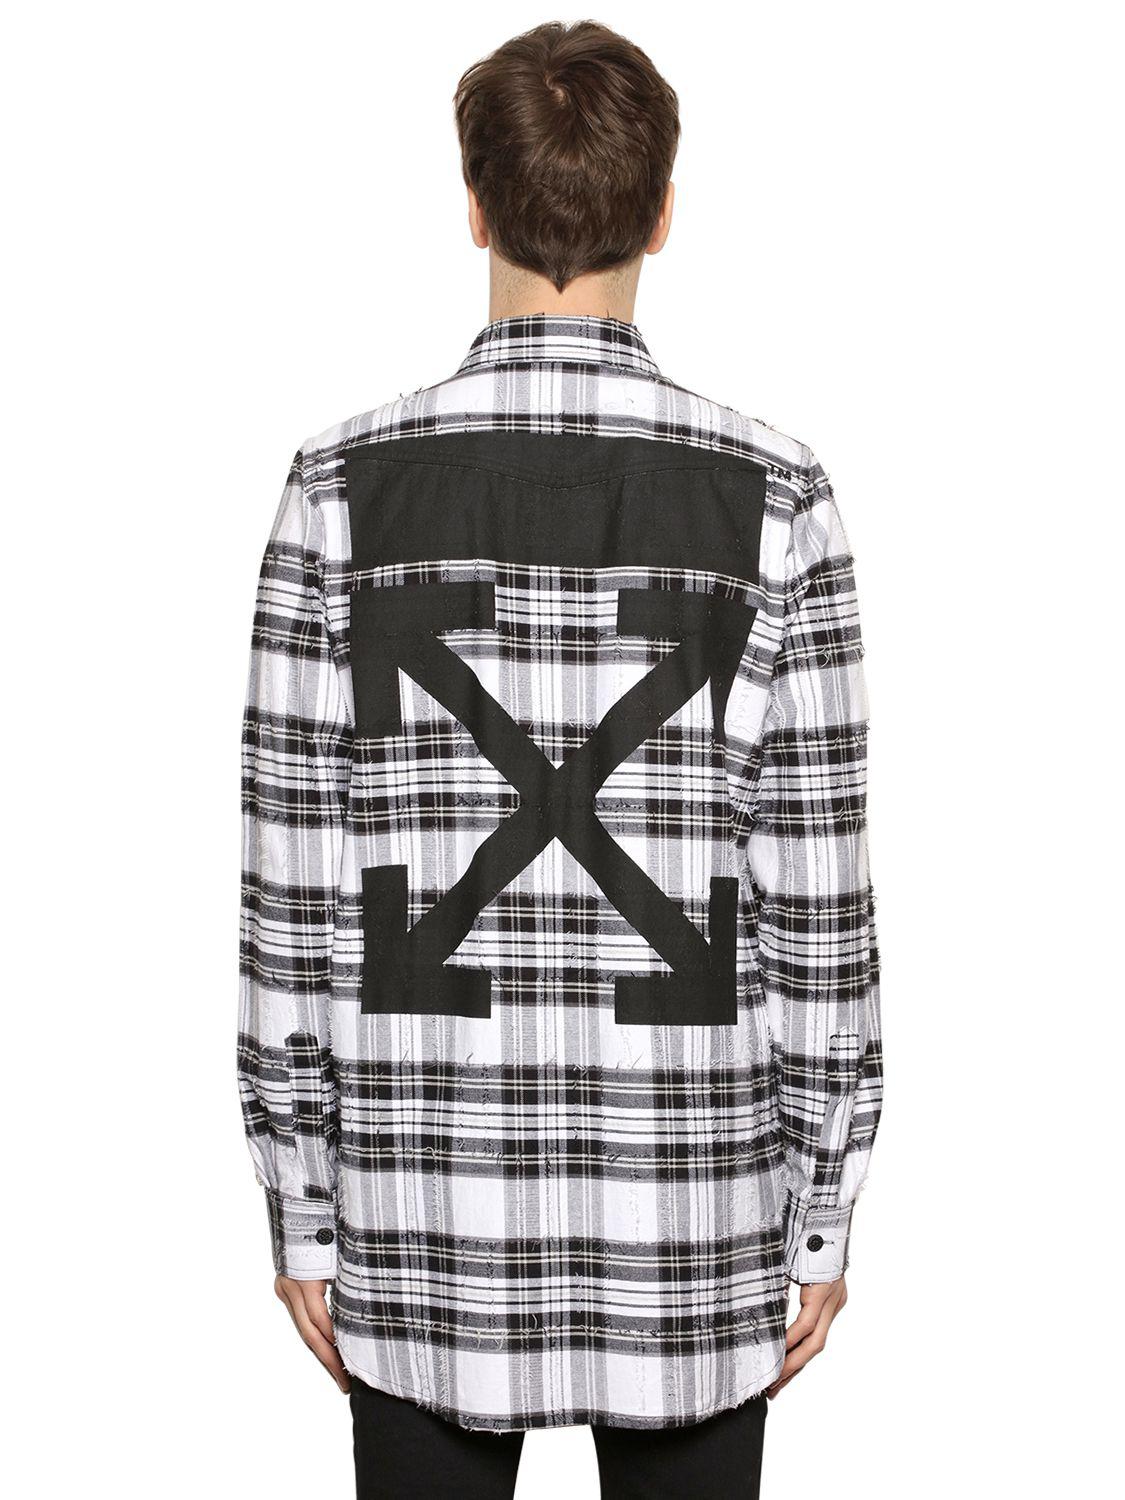 Off-White c/o Virgil Abloh Flannel Distressed Checked Cotton Shirt in Black/ White (Black) for Men - Lyst